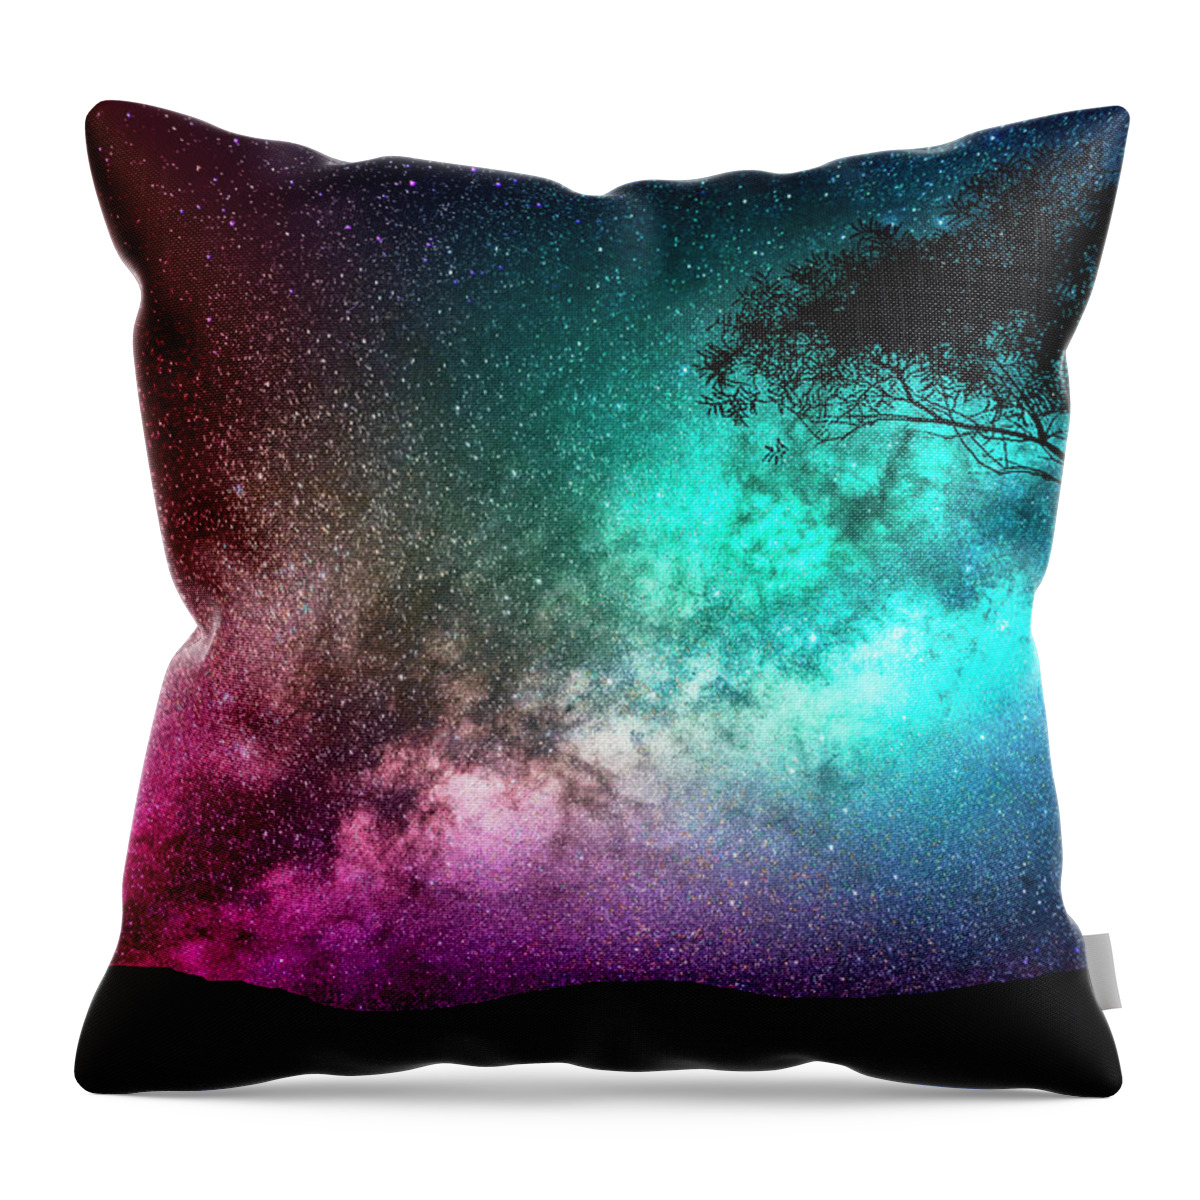 Dreamland Throw Pillow featuring the mixed media Dreamland Midnight Moment With Magical Nightsky by Johanna Hurmerinta